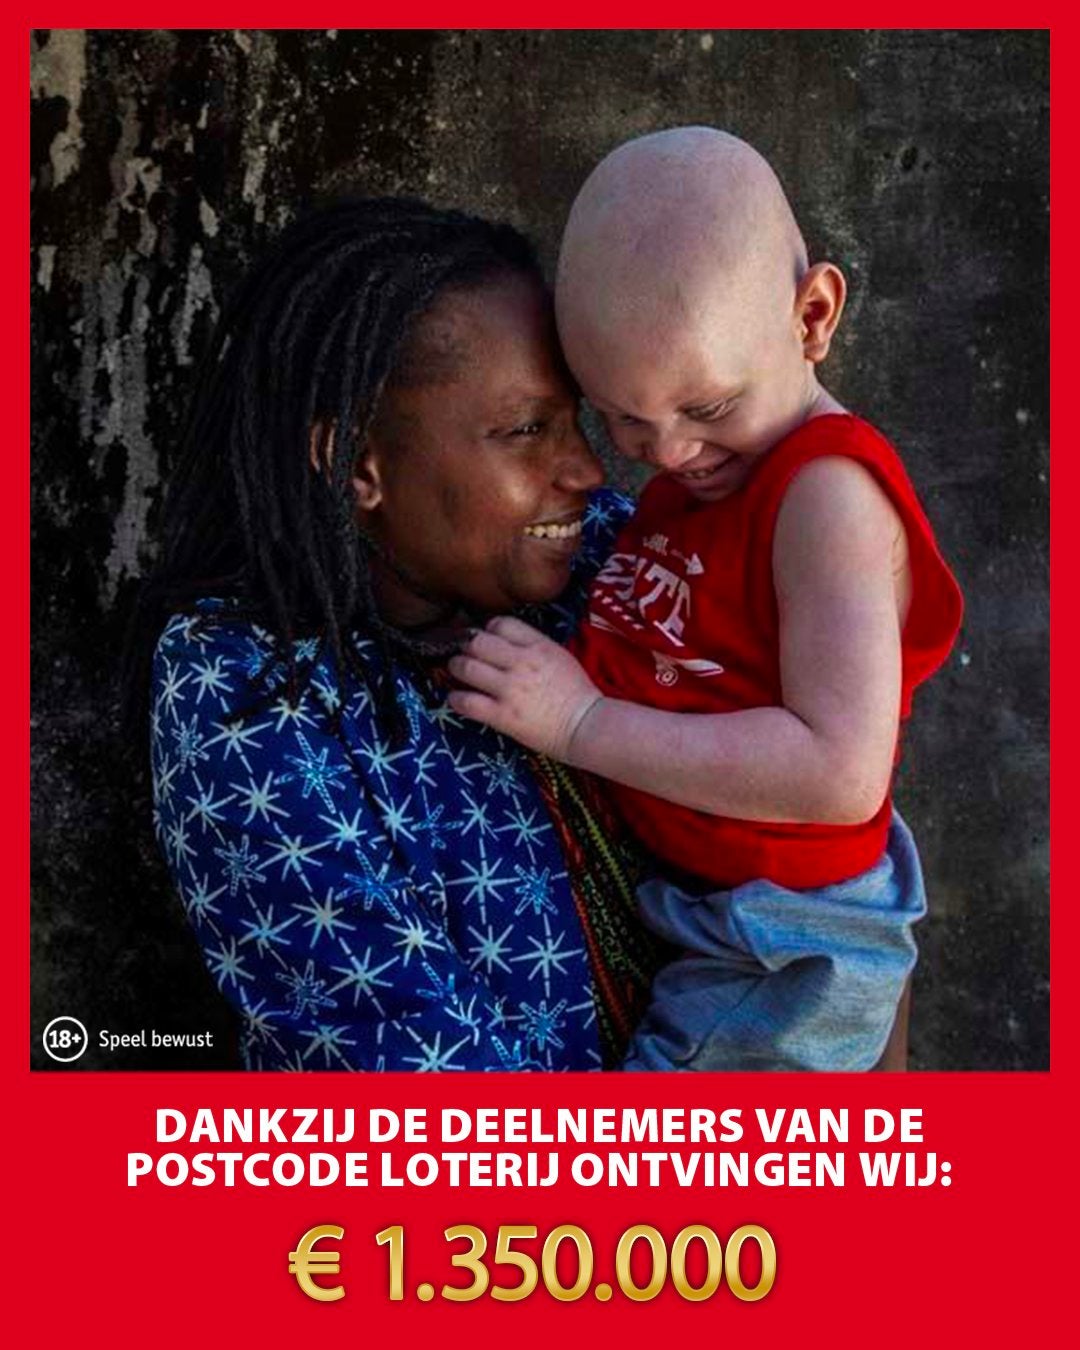 A mother holding a child with albinism